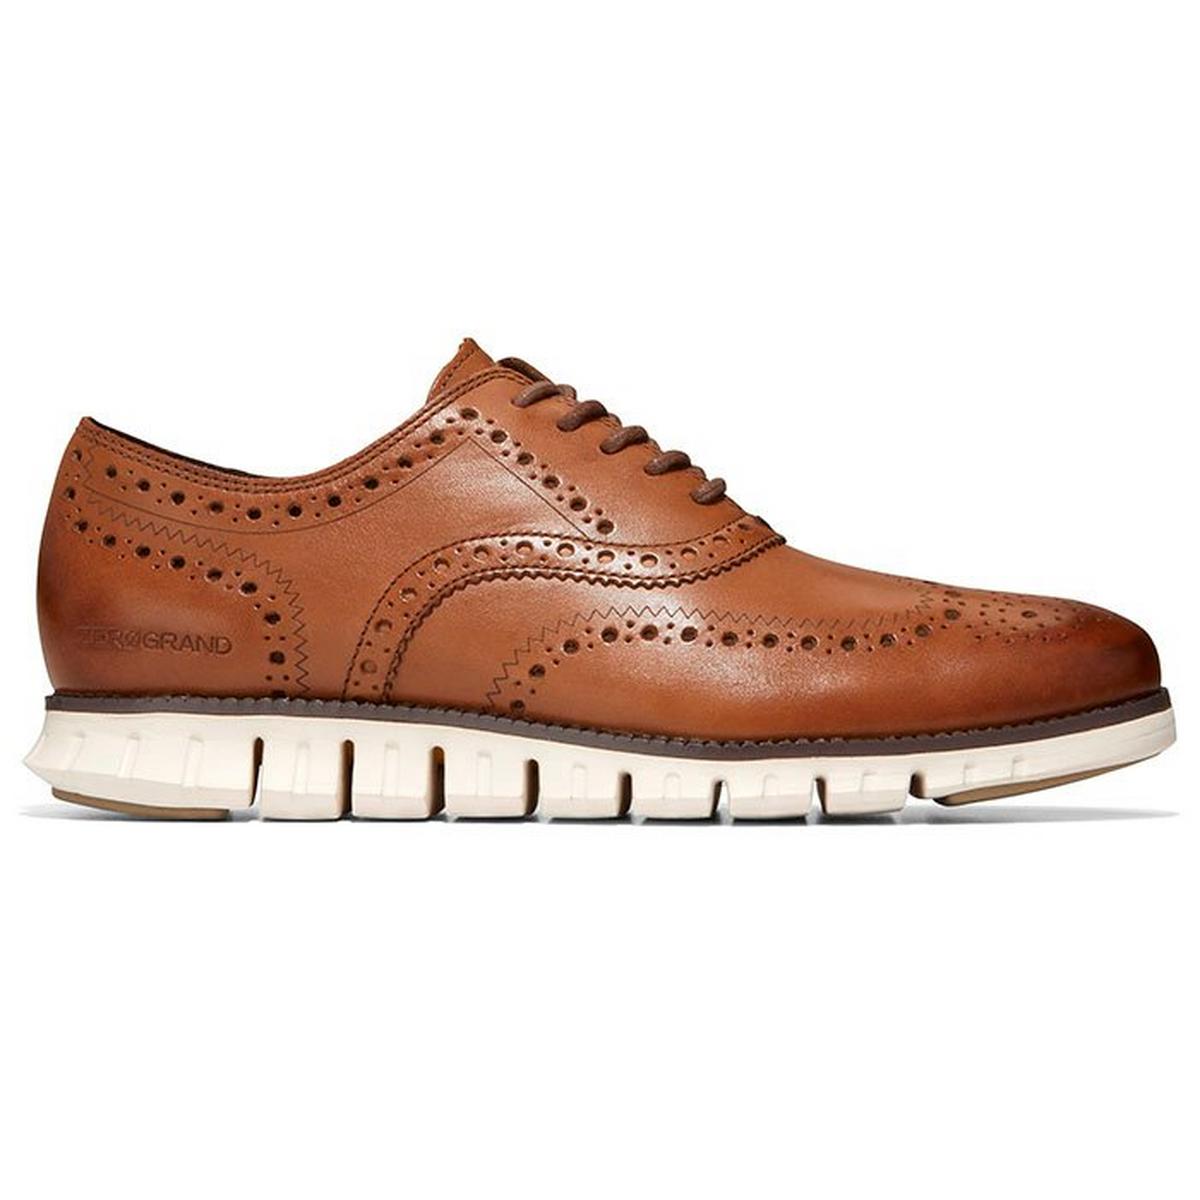 Chaussures oxford ZEROGRAND Wingtip pour hommes